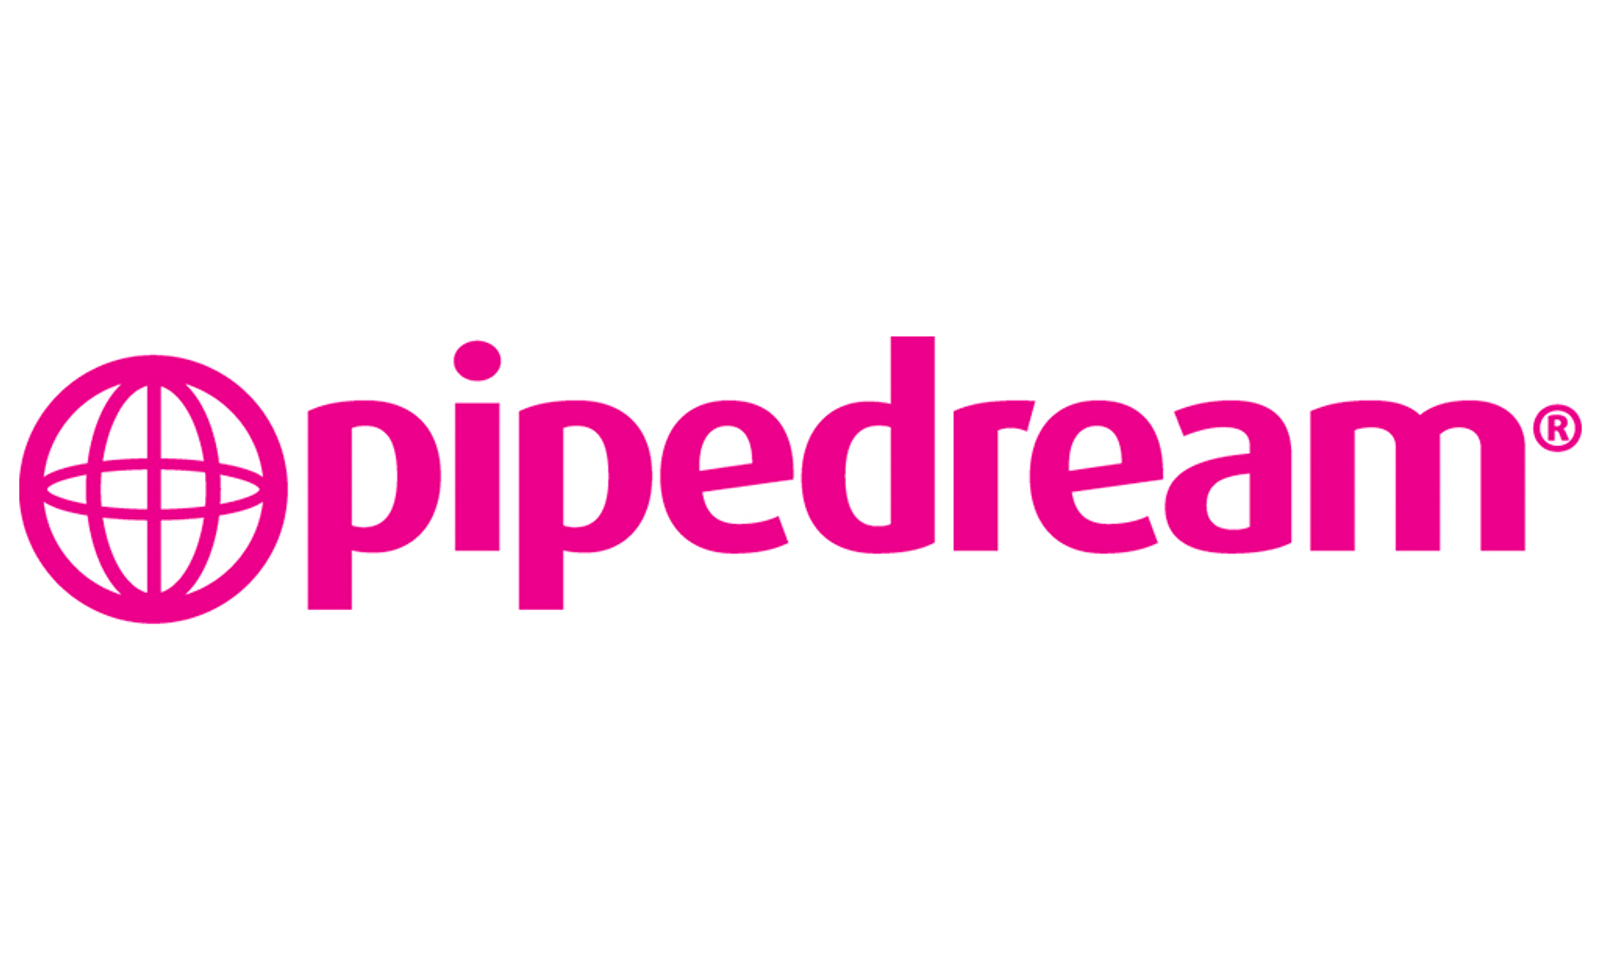 Pipedream Now Has Ultramodern Distribution Ctr. in Netherlands